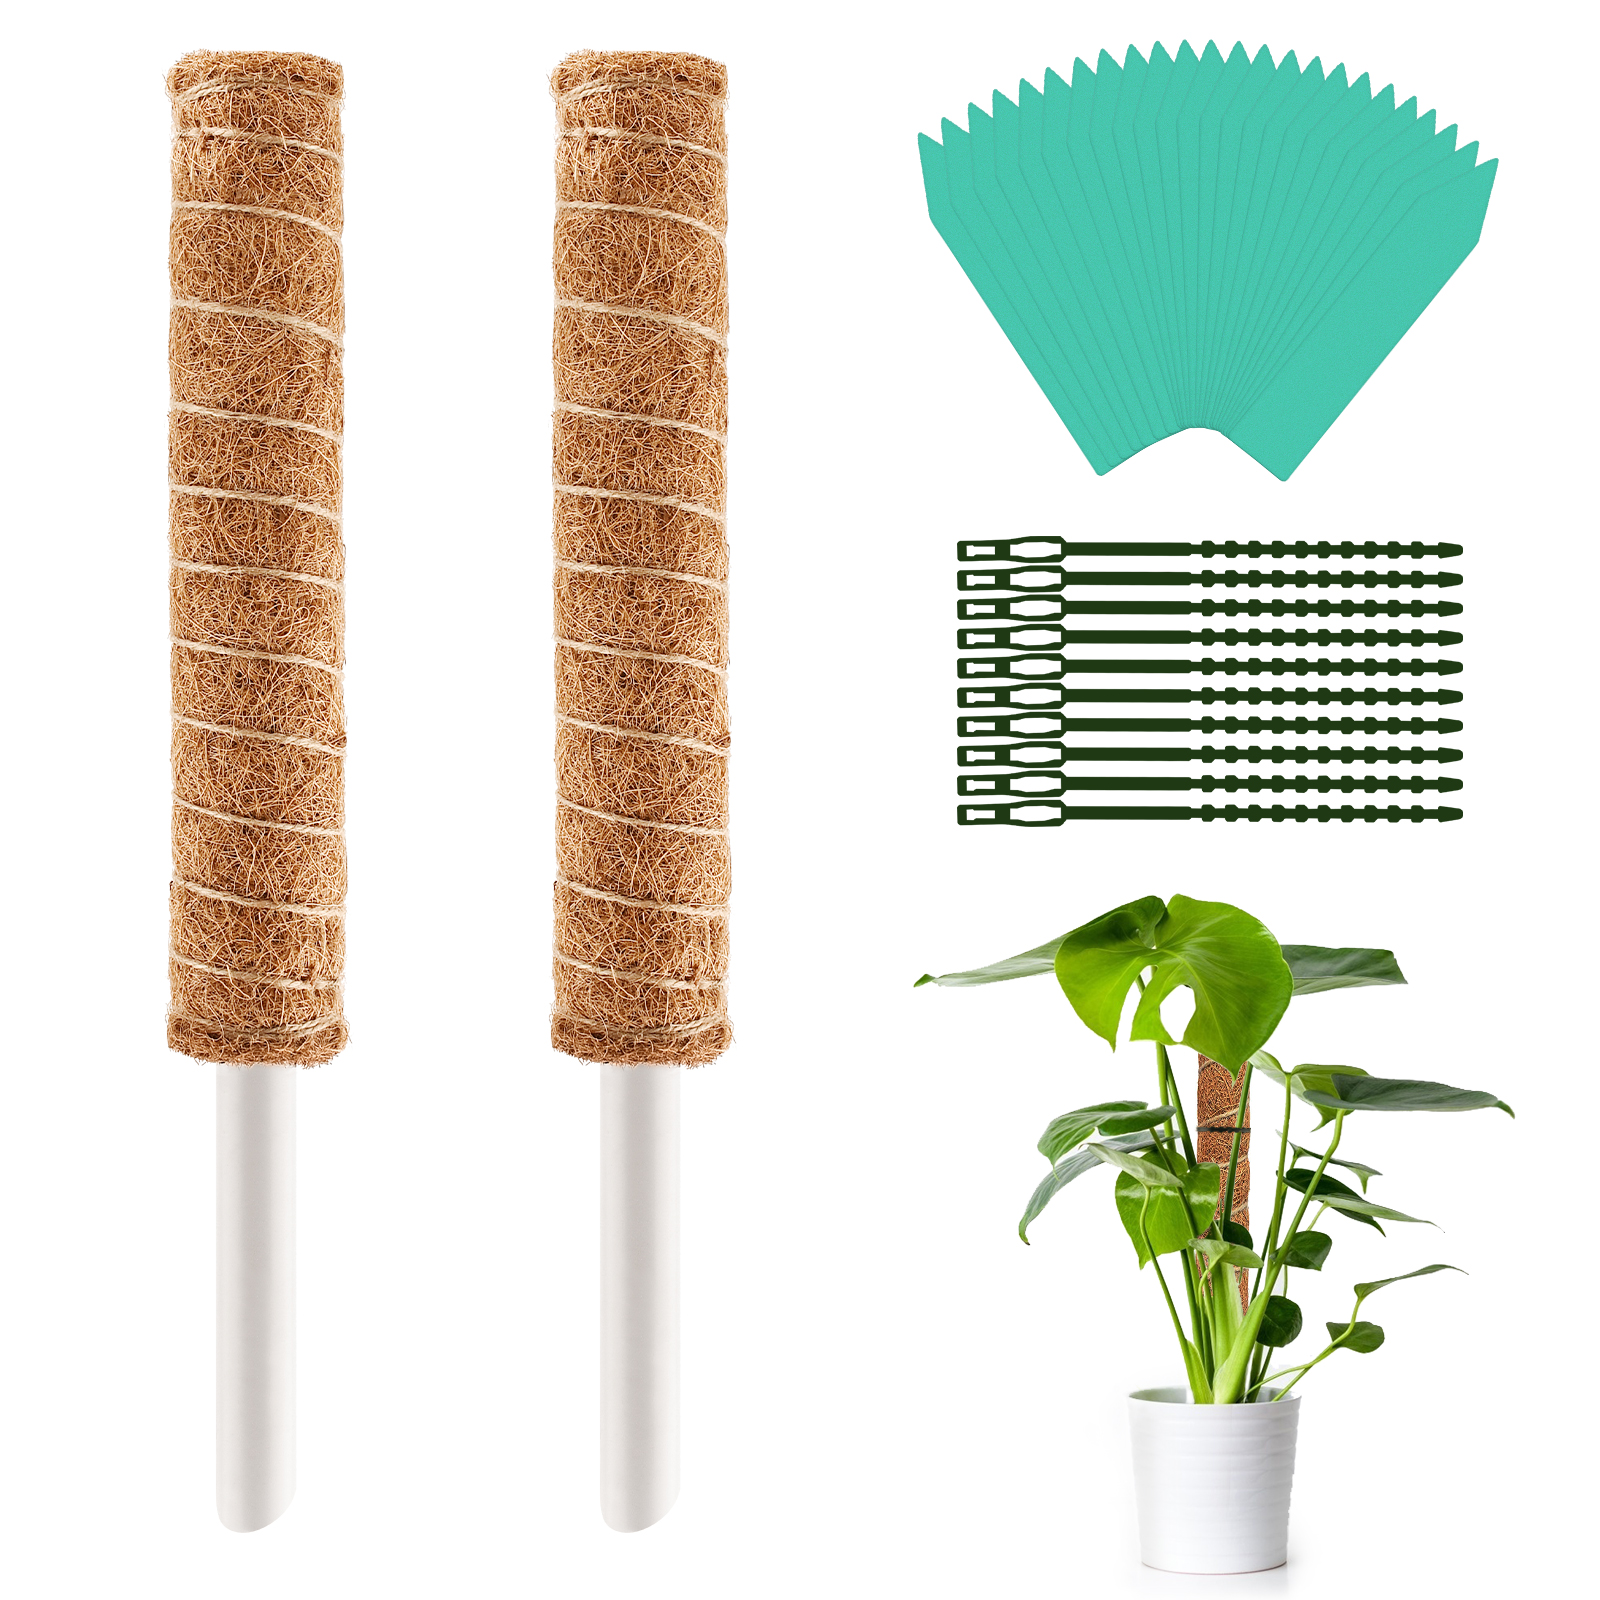 GOXAWEE Moss Pole, 2Pcs 15.6'' Coco Coir Totem Pole for Climbing Plants, Supports Indoor Plants to Grow Upwards, Moss Sticks with 20 Pcs Plastic Plant Labels and 10Pcs Plastic Twist Tie